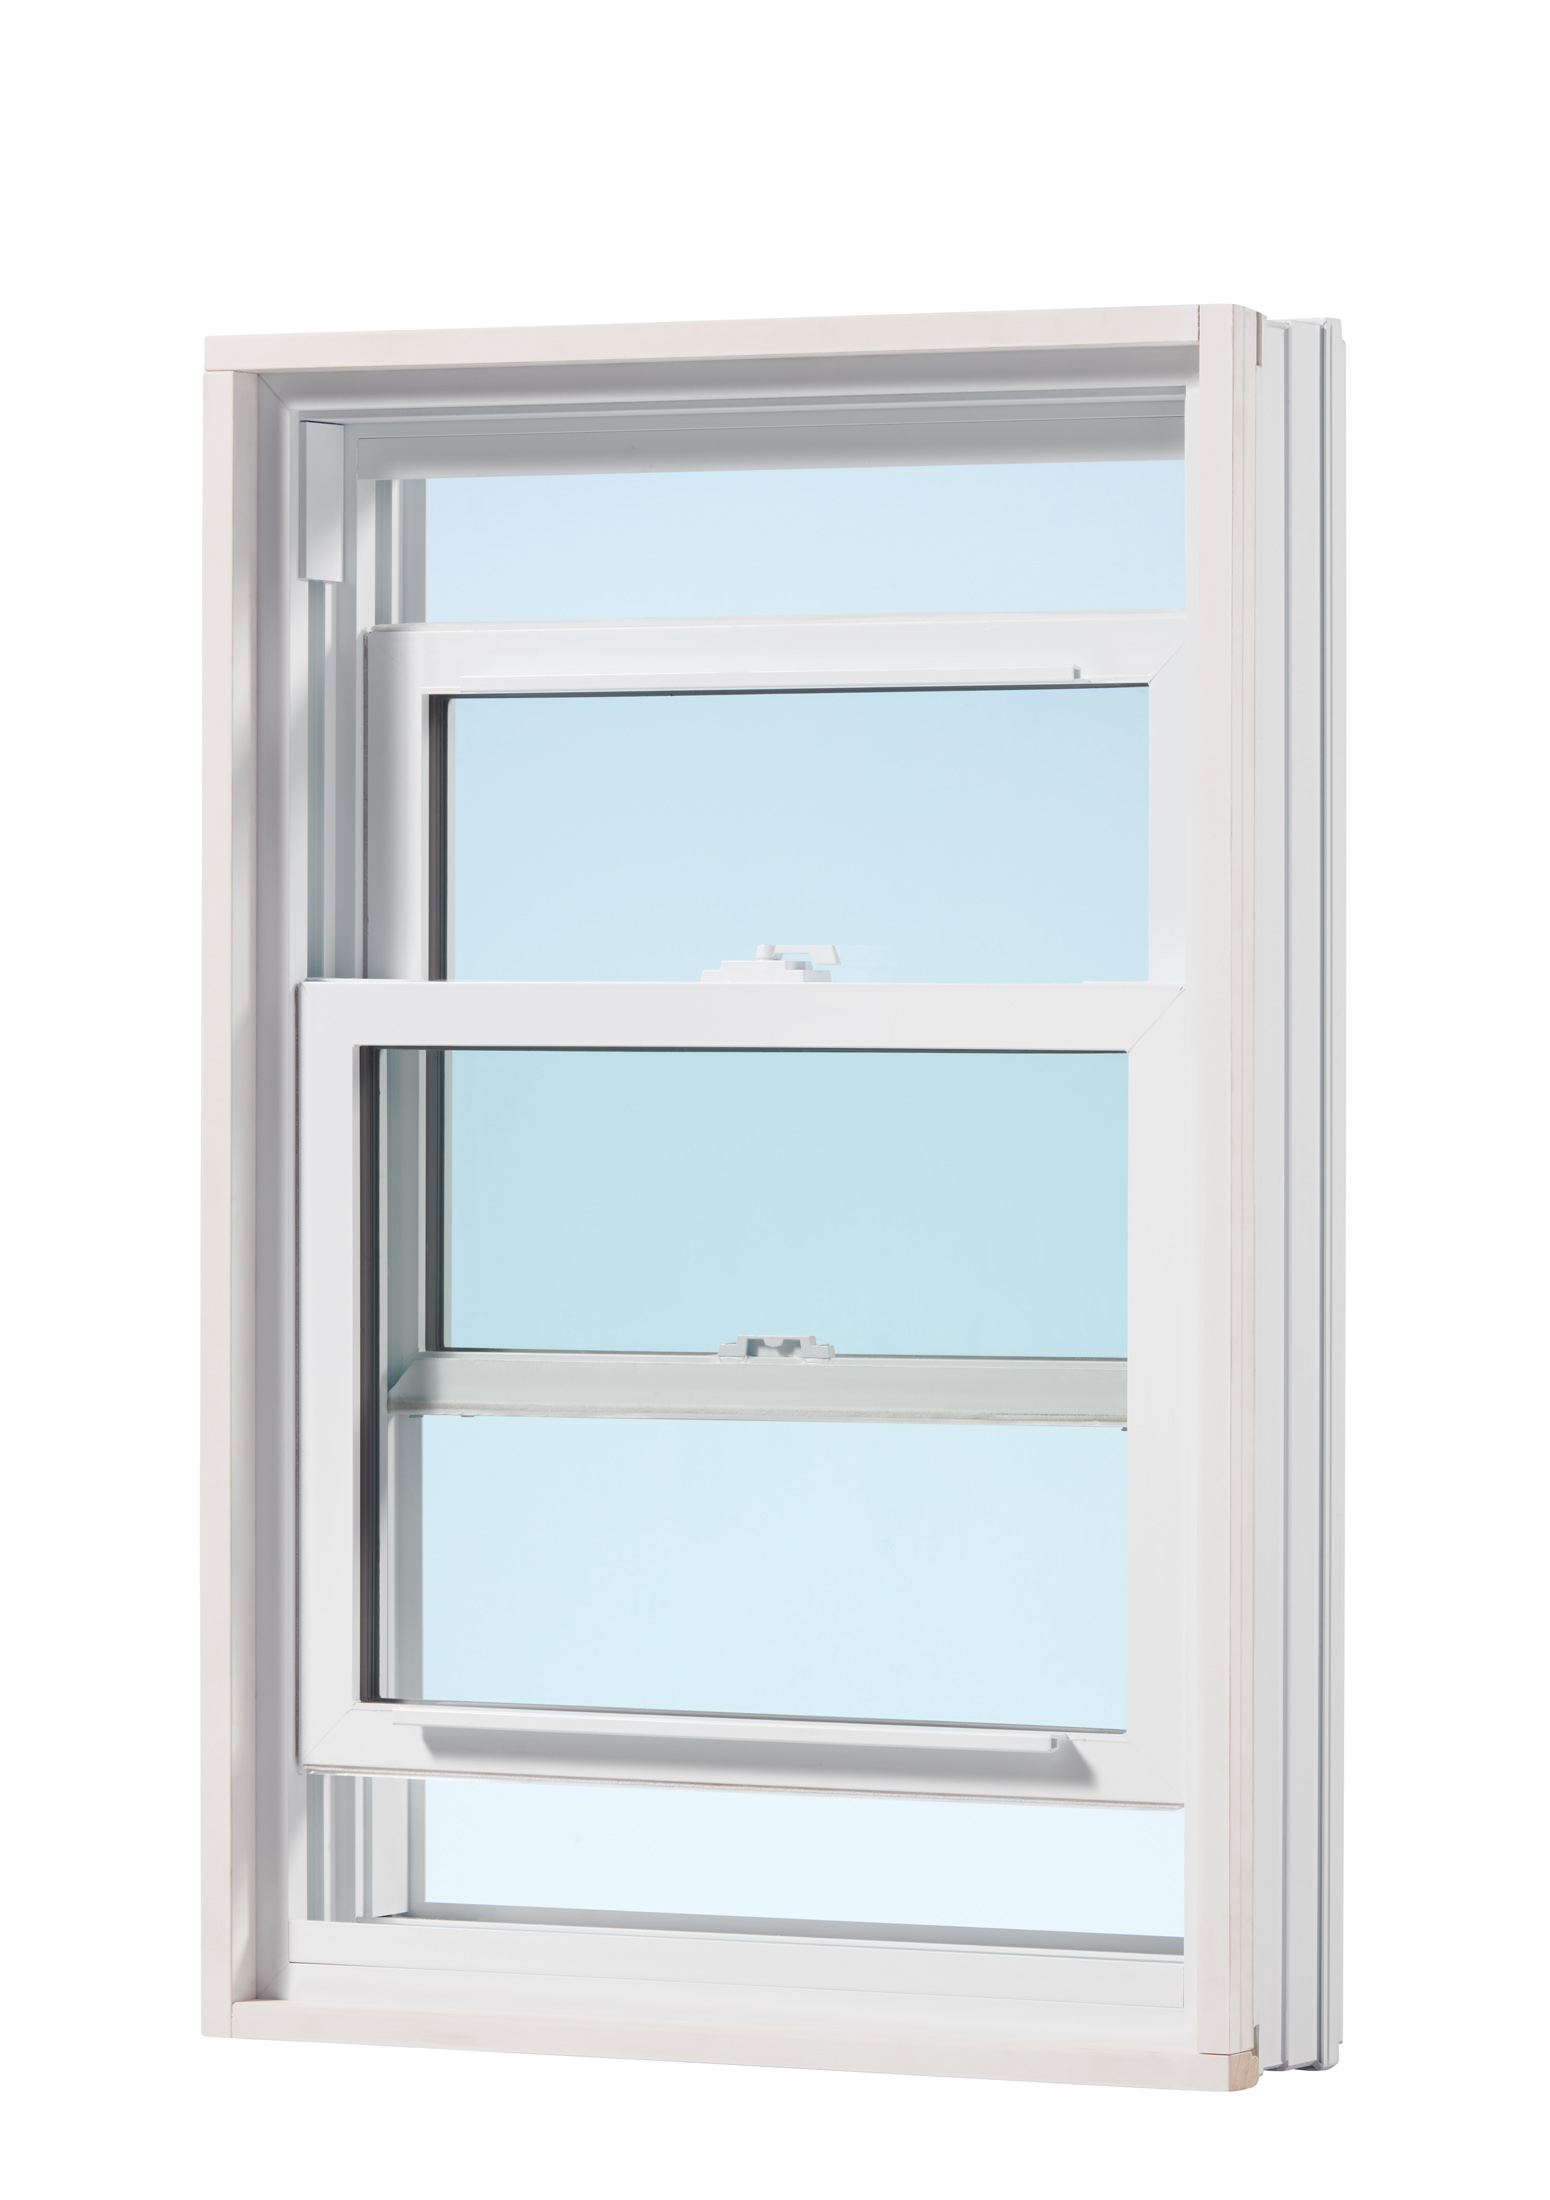 goldenvinyl®-1000-series-double-hung-window-img-5